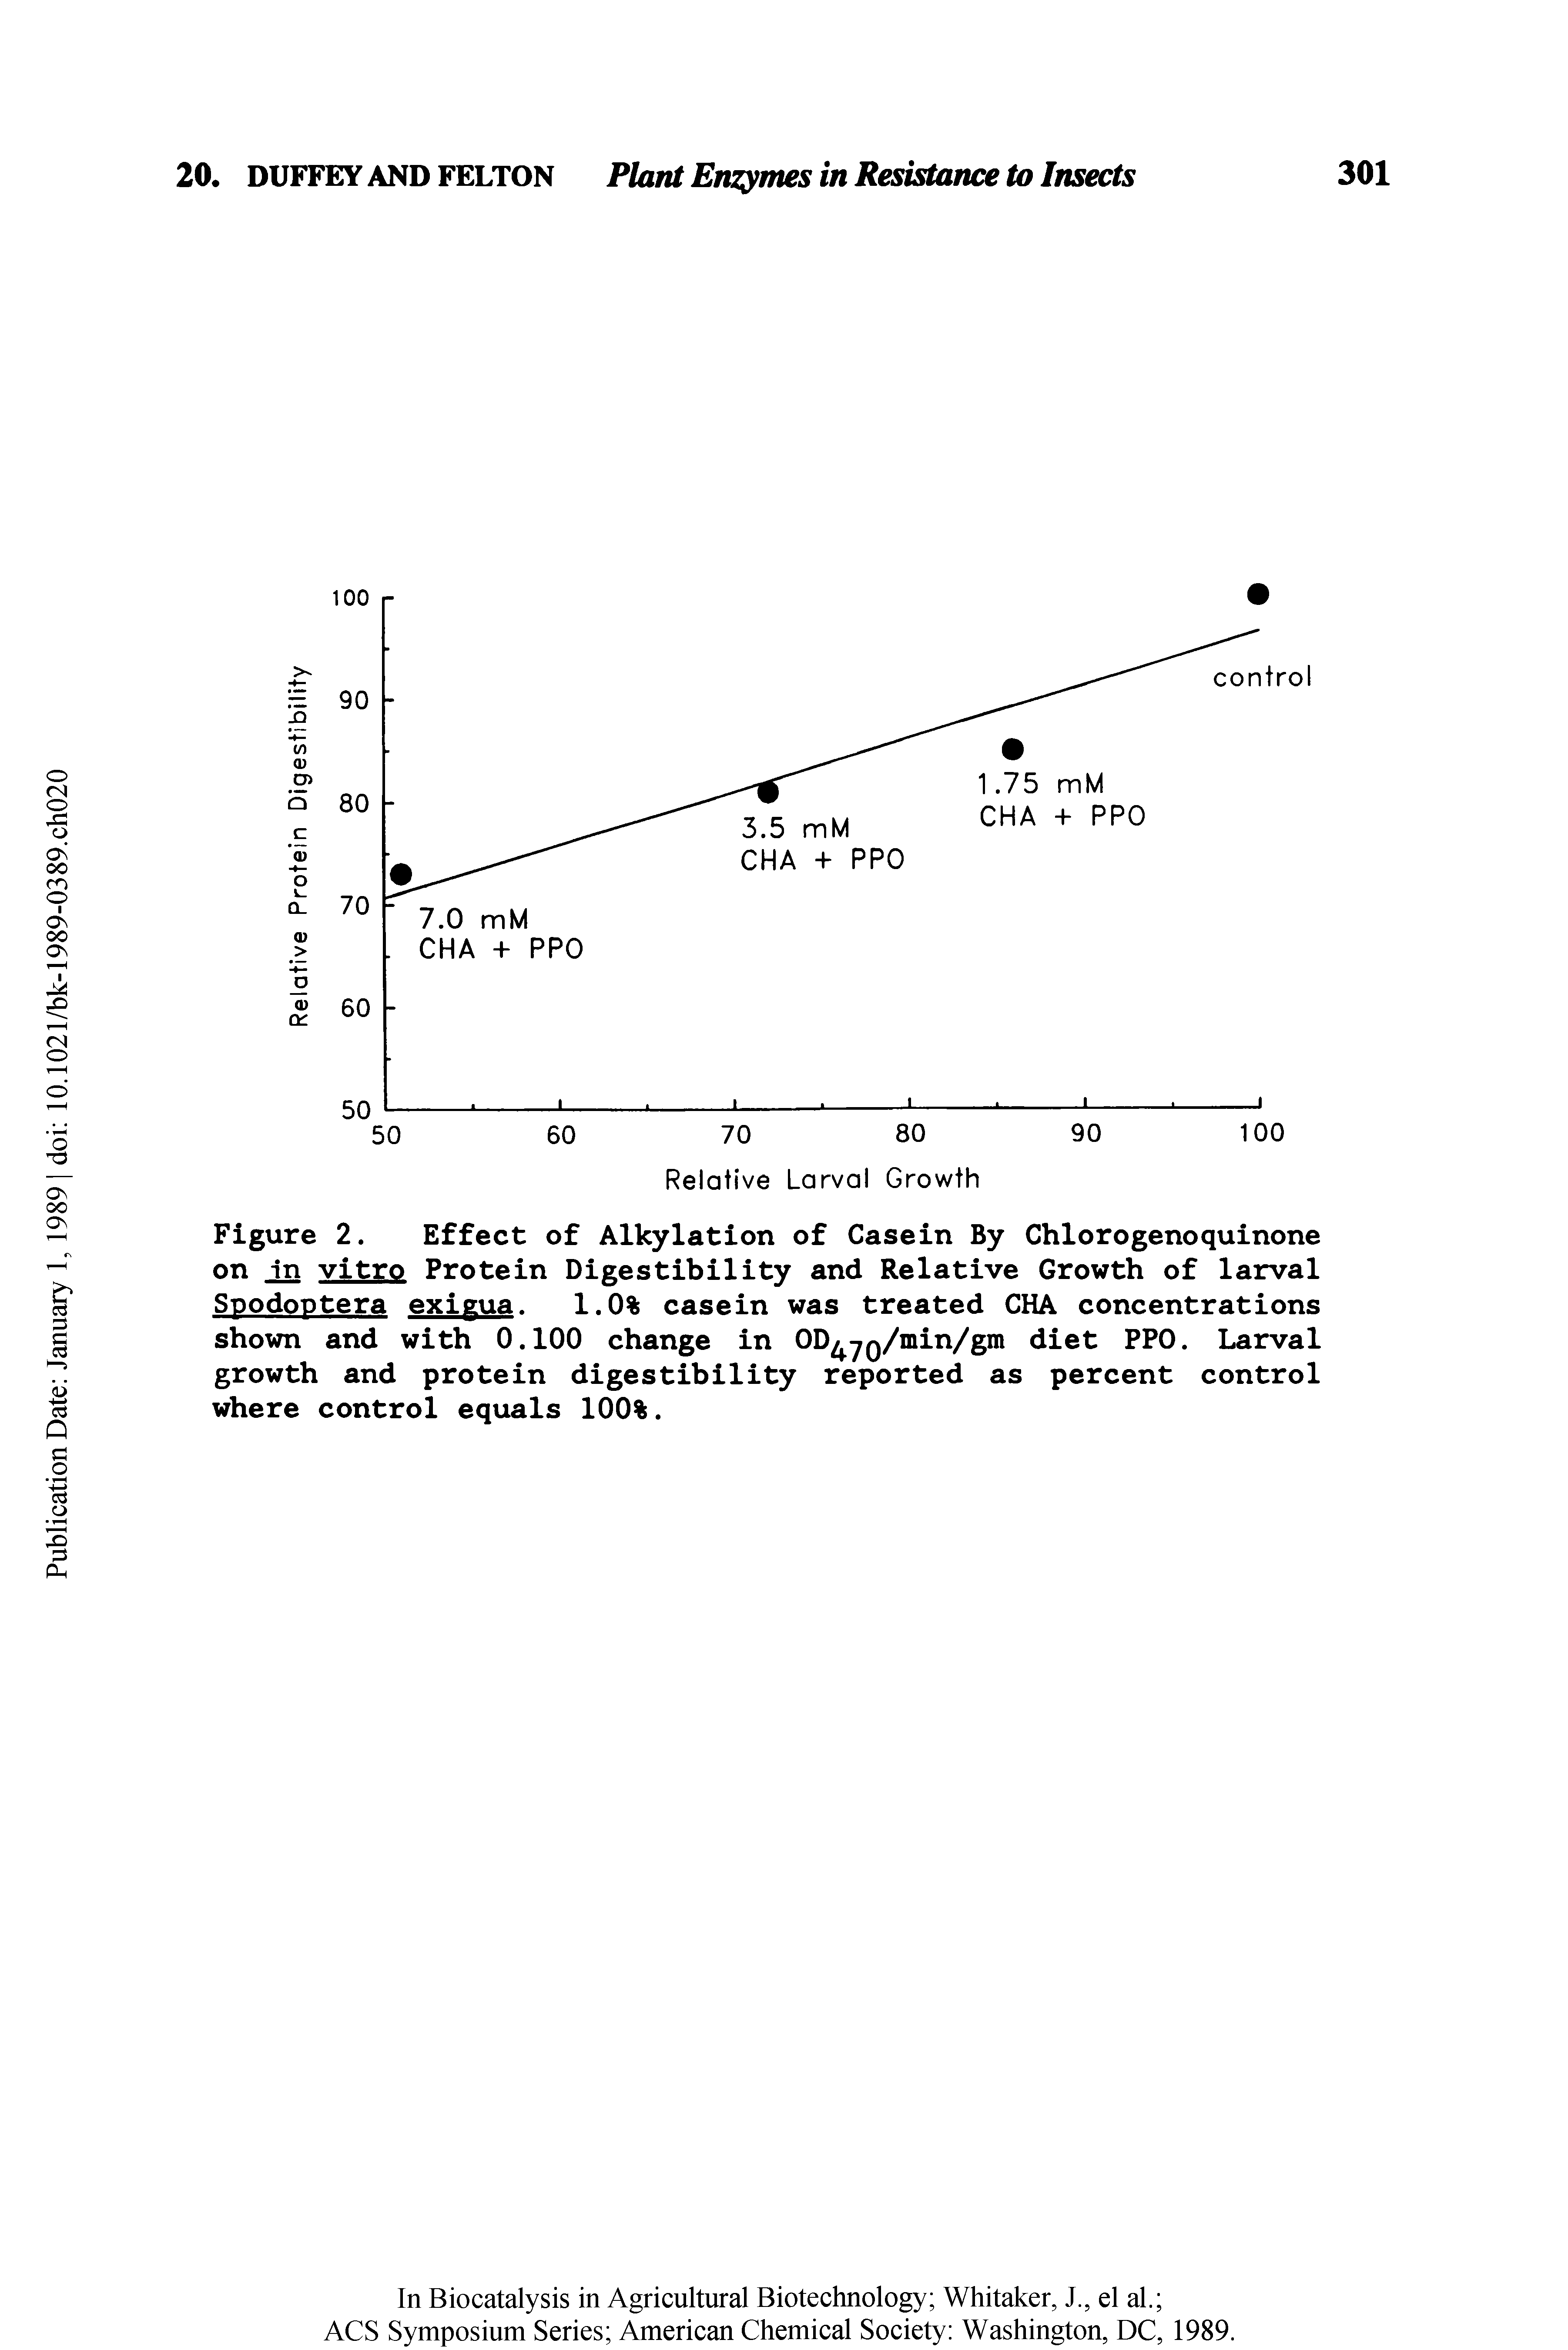 Figure 2. Effect of Alkylation of Casein By Chlorogenoquinone on in vitro Protein Digestibility and Relative Growth of larval Spodoptera exigua. 1.0% casein was treated CHA concentrations shown and with 0.100 change in OD yQ/min/gm diet PPO. Larval growth and protein digestibility reported as percent control where control equals 100%.